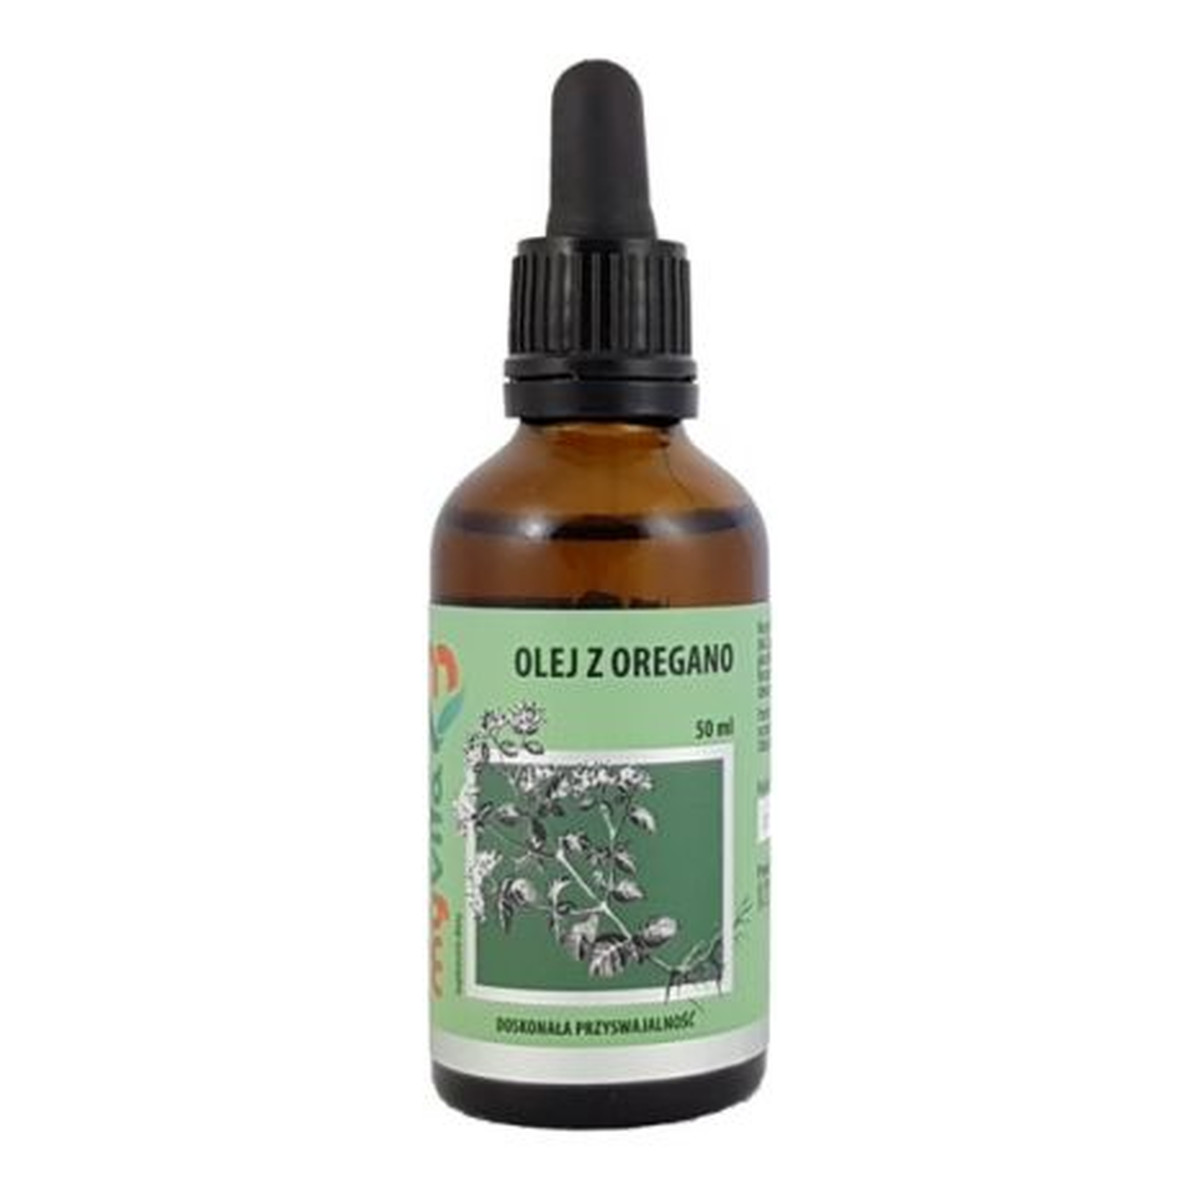 Nature's Answer Oil Of Oregano olej z oregano suplement diety w kroplach 50ml